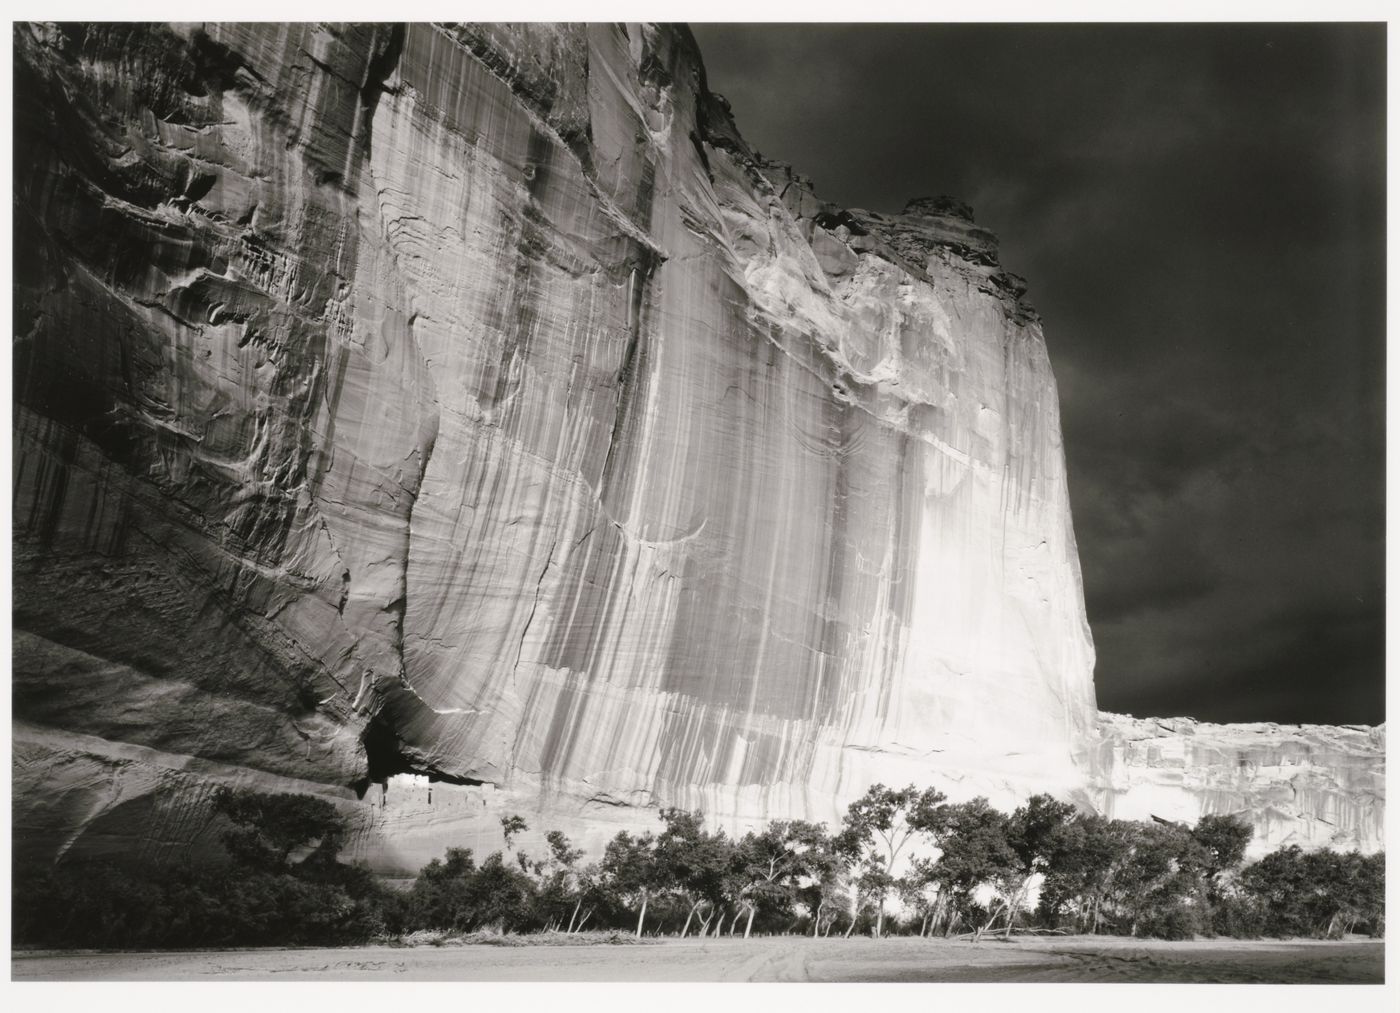 View of the rock face at Canyon de Chelly and showing the White House Ruins on the lower left, Arizona, United States